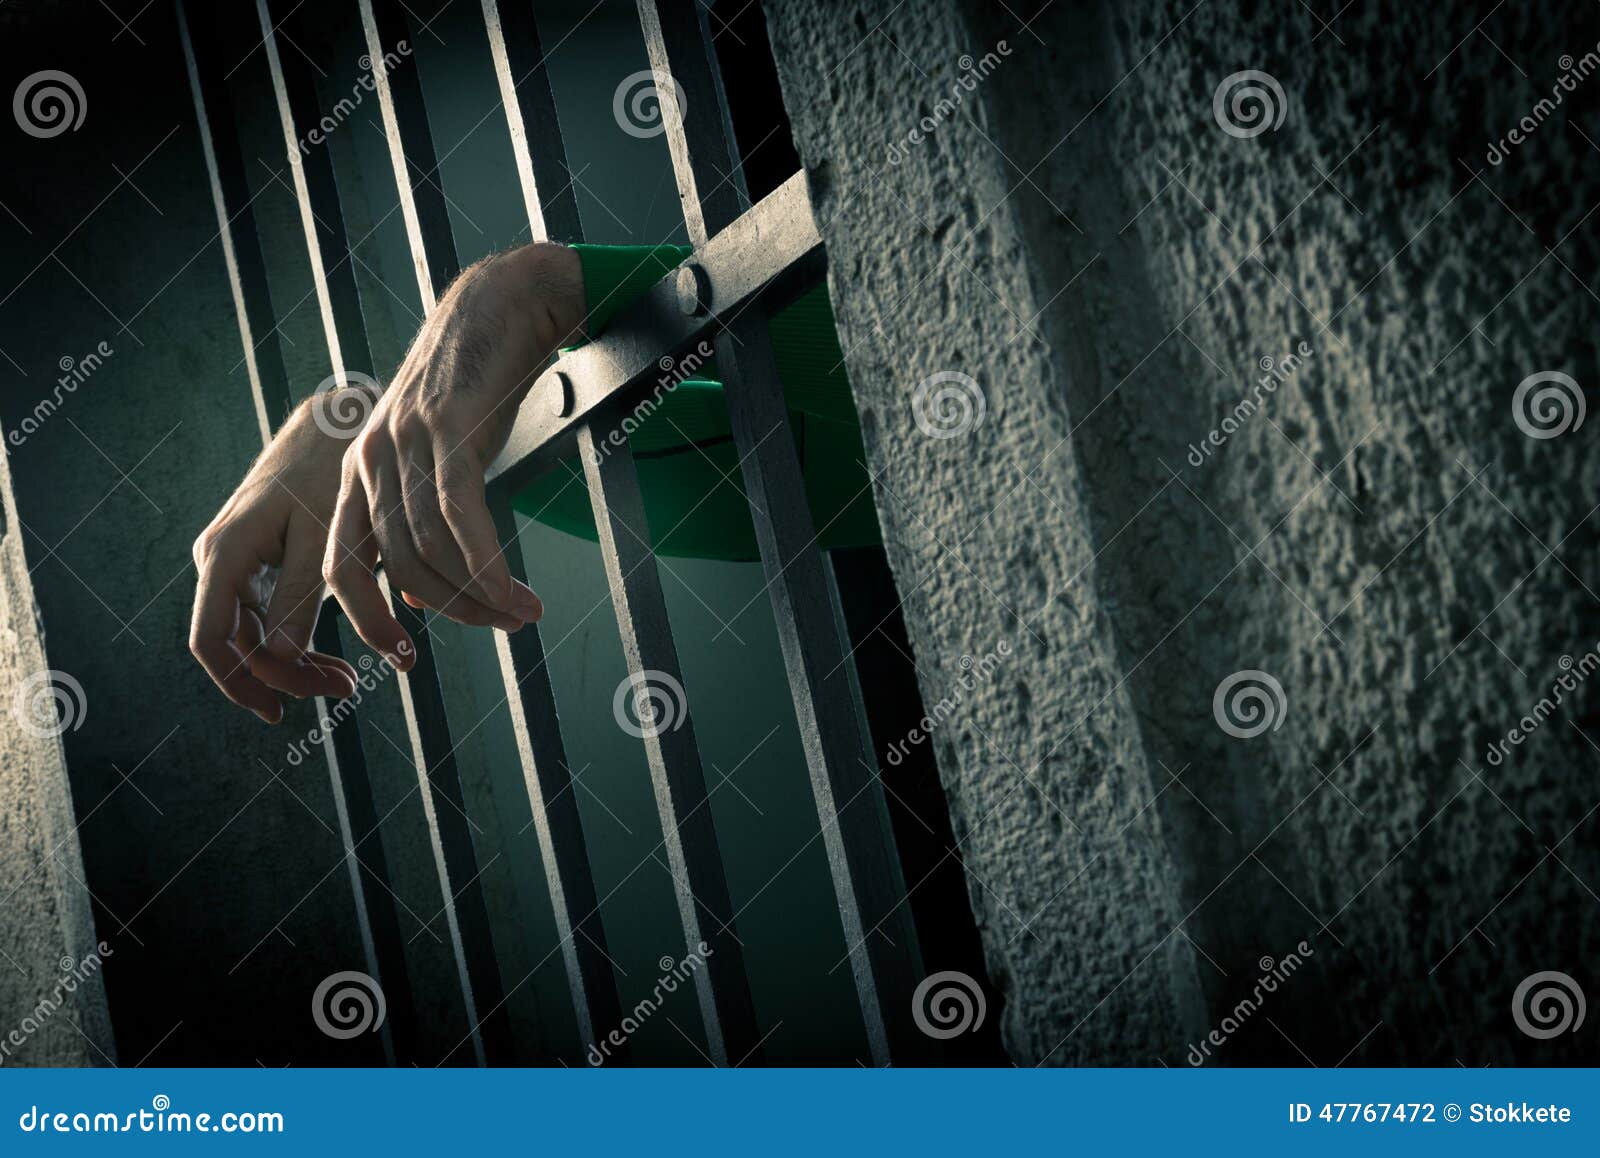 man in jail hands close-up